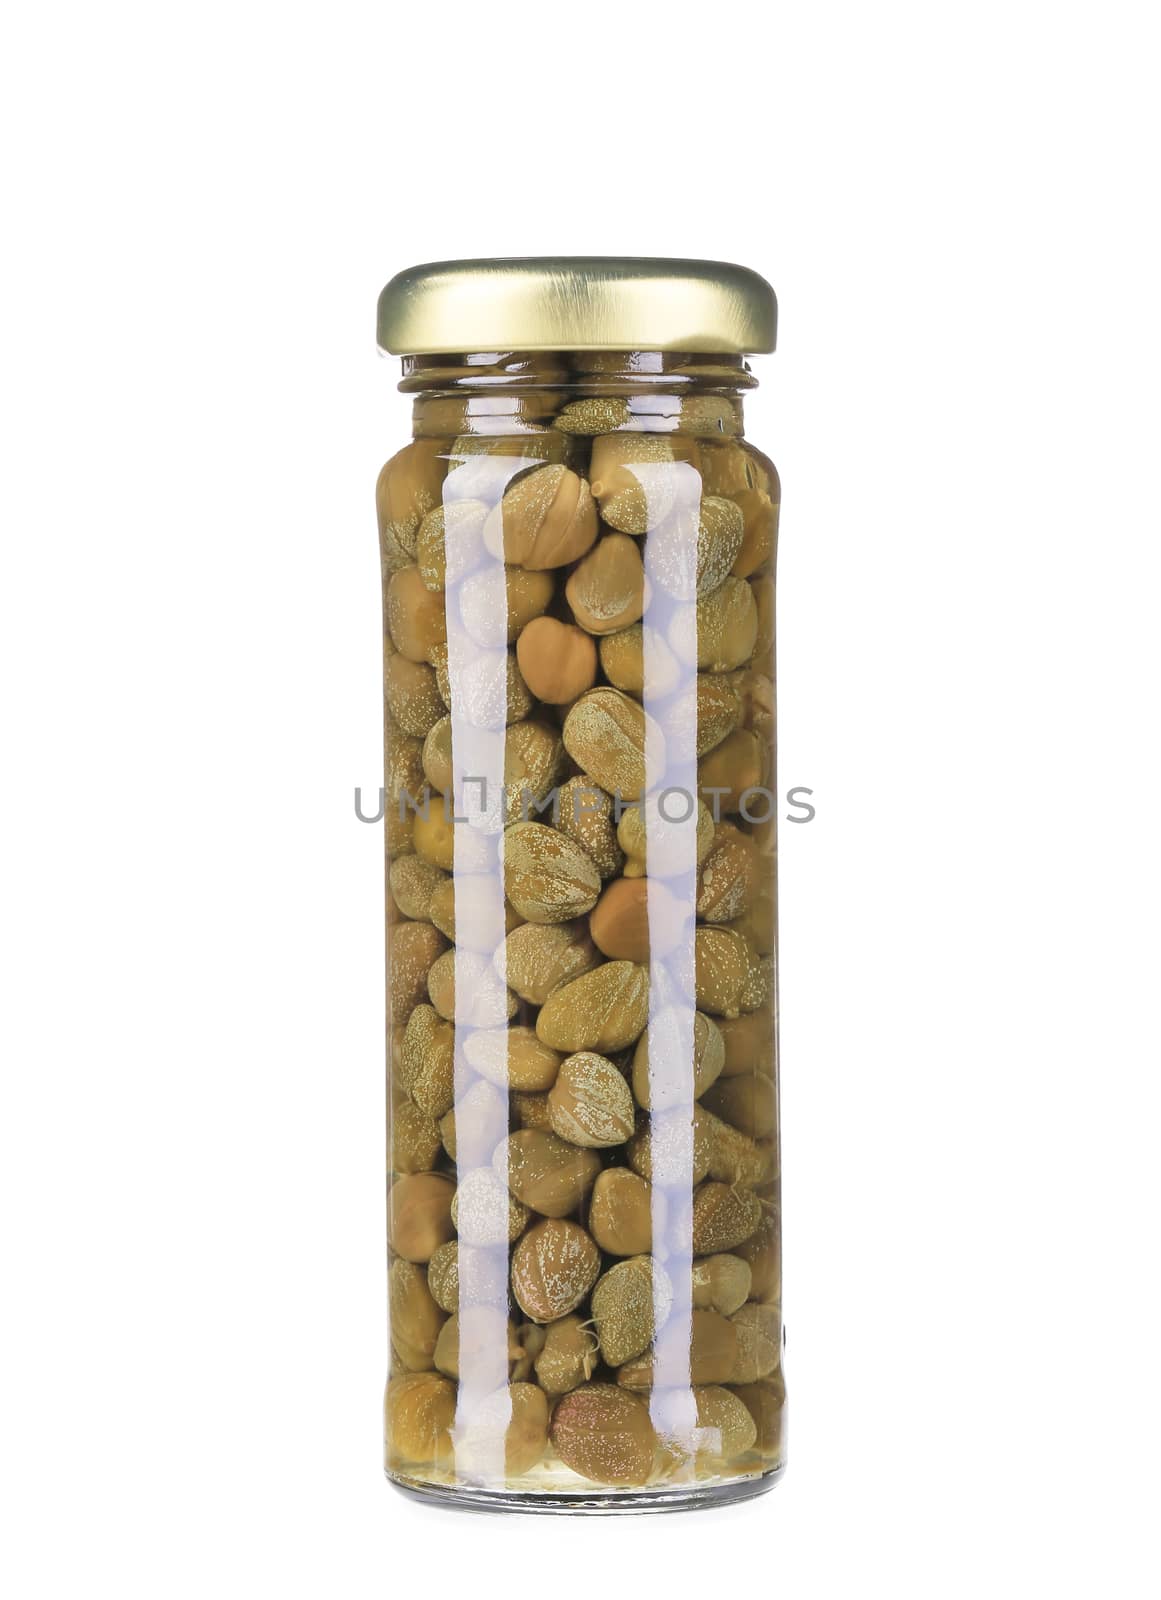 Capers vegetables canned preserved. by indigolotos